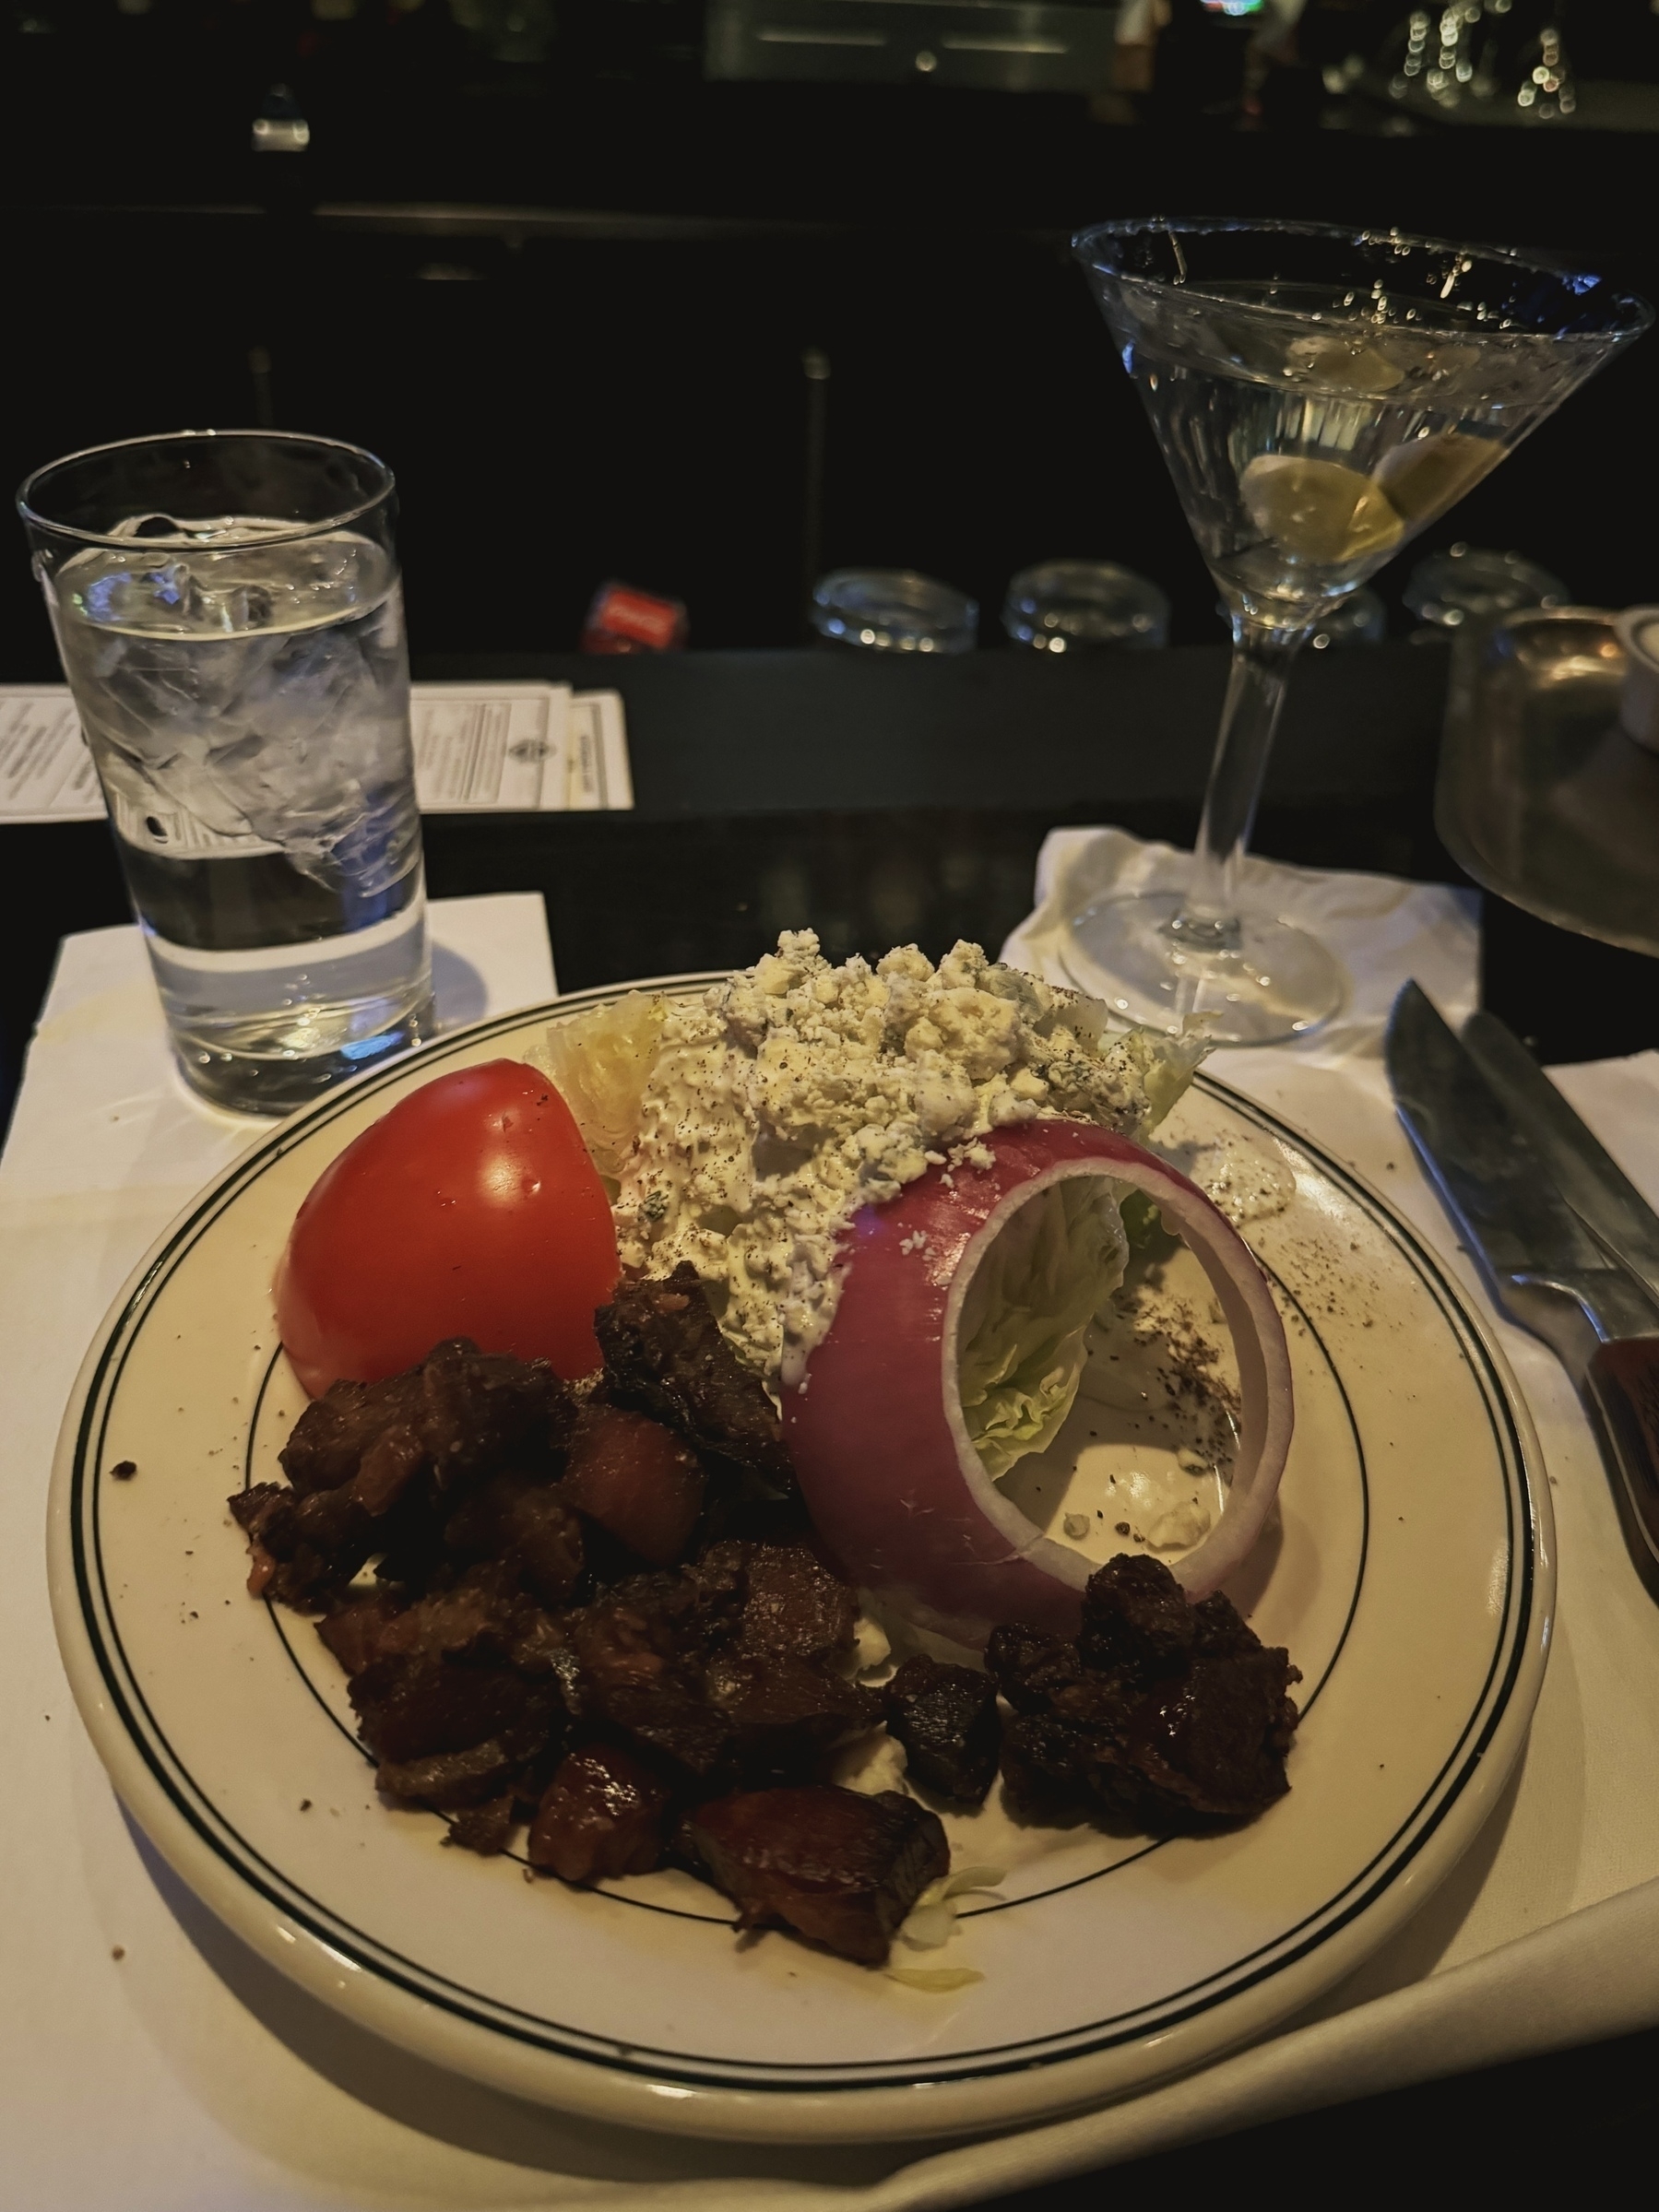 A wedge salad with an absurd amount of thick cut bacon bits next to a water glass and martini. 